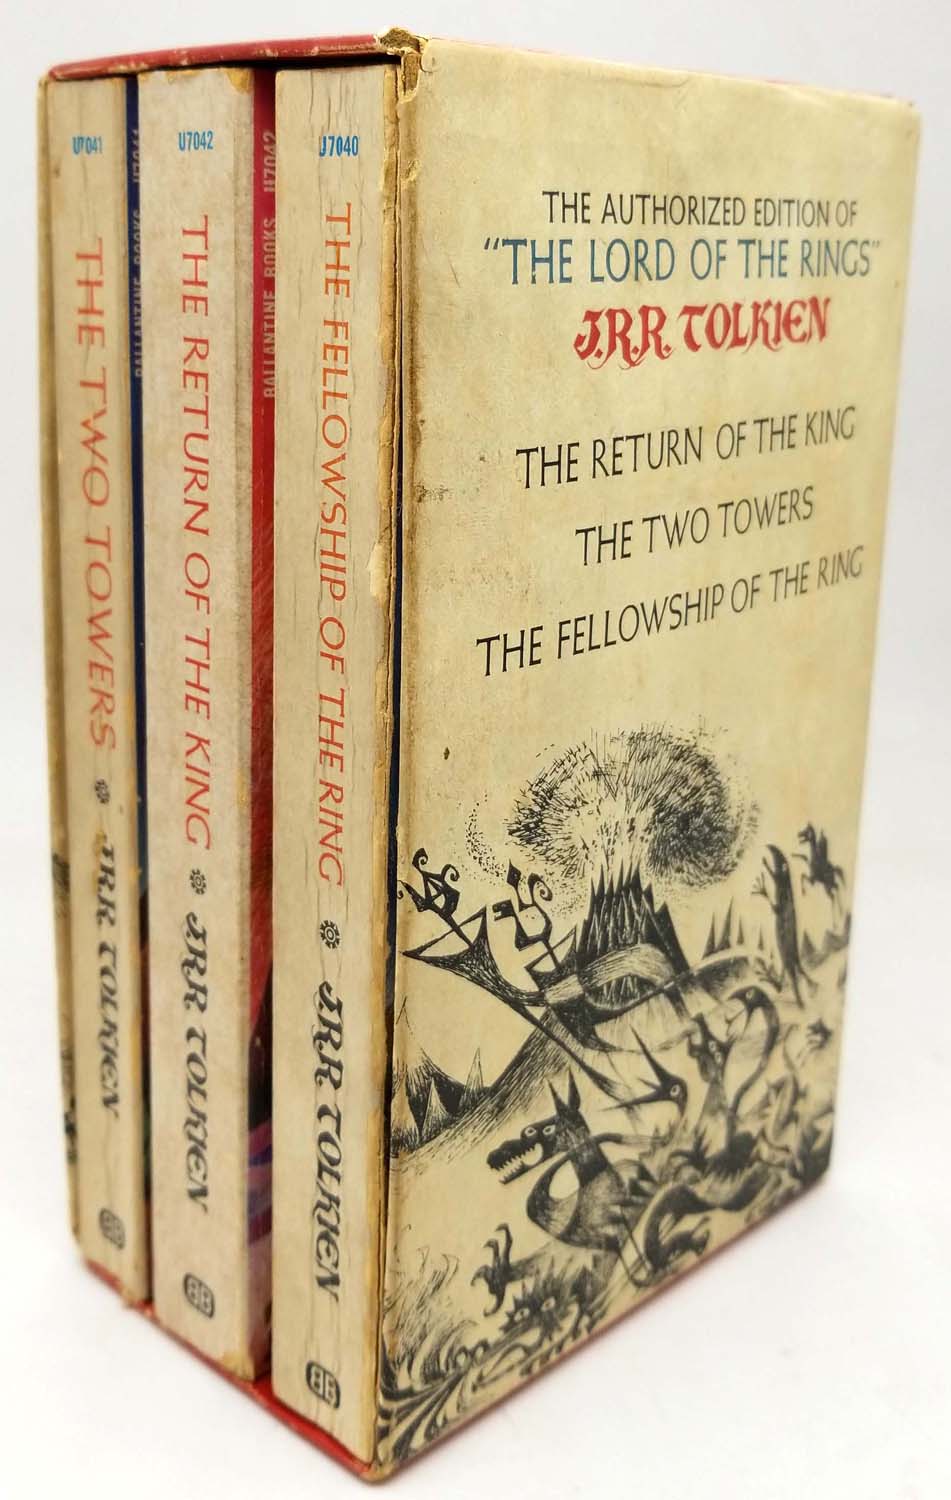 Lord of the Rings - JRR Tolkien Authorized Edition PB Box Set 1966